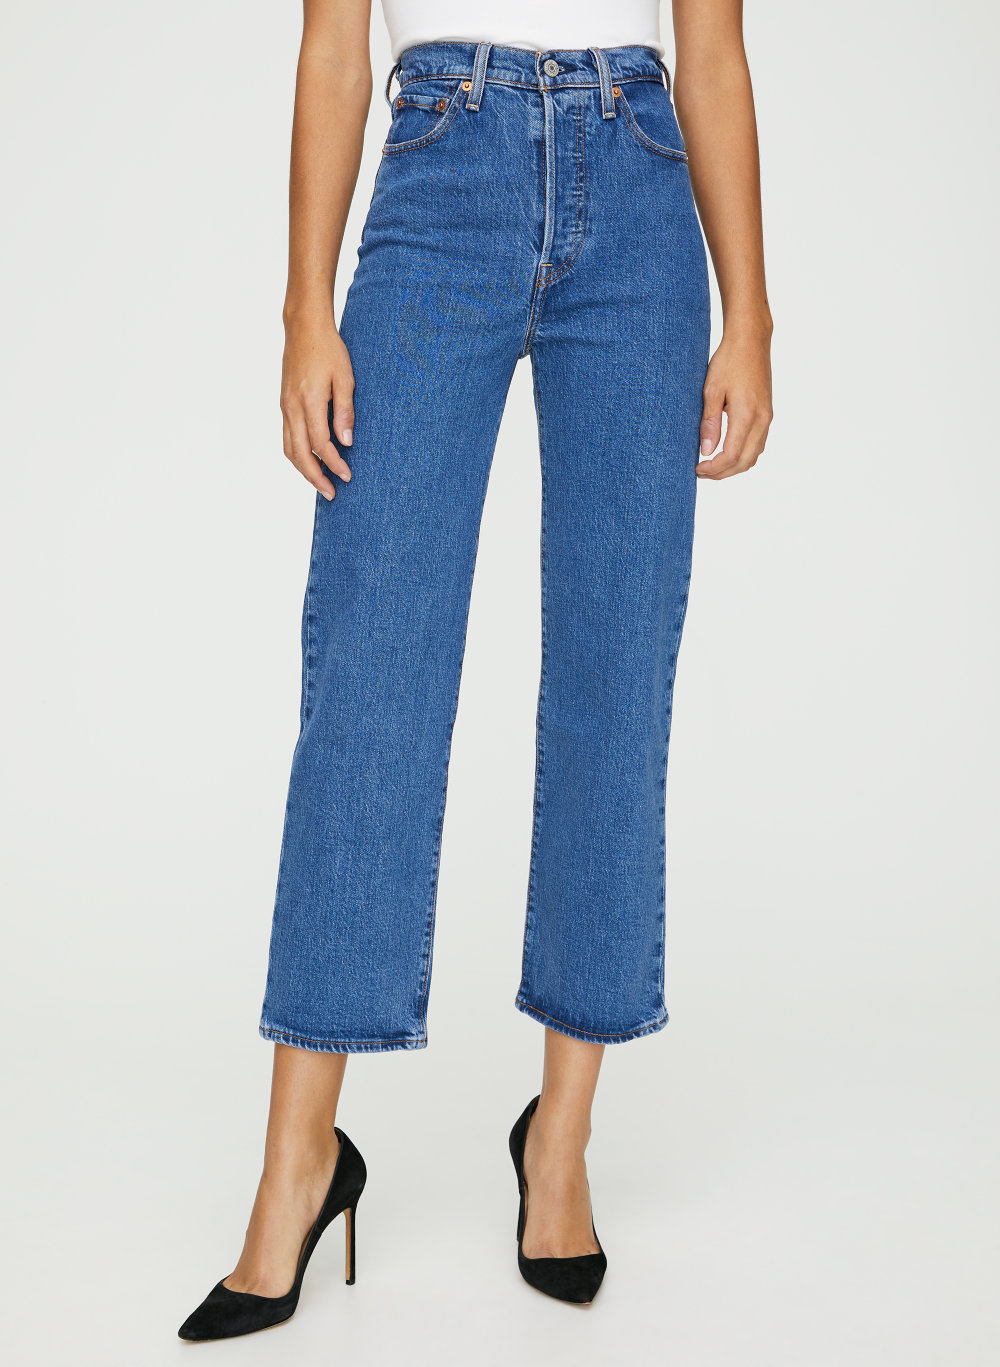 ribcage straight ankle jeans levis